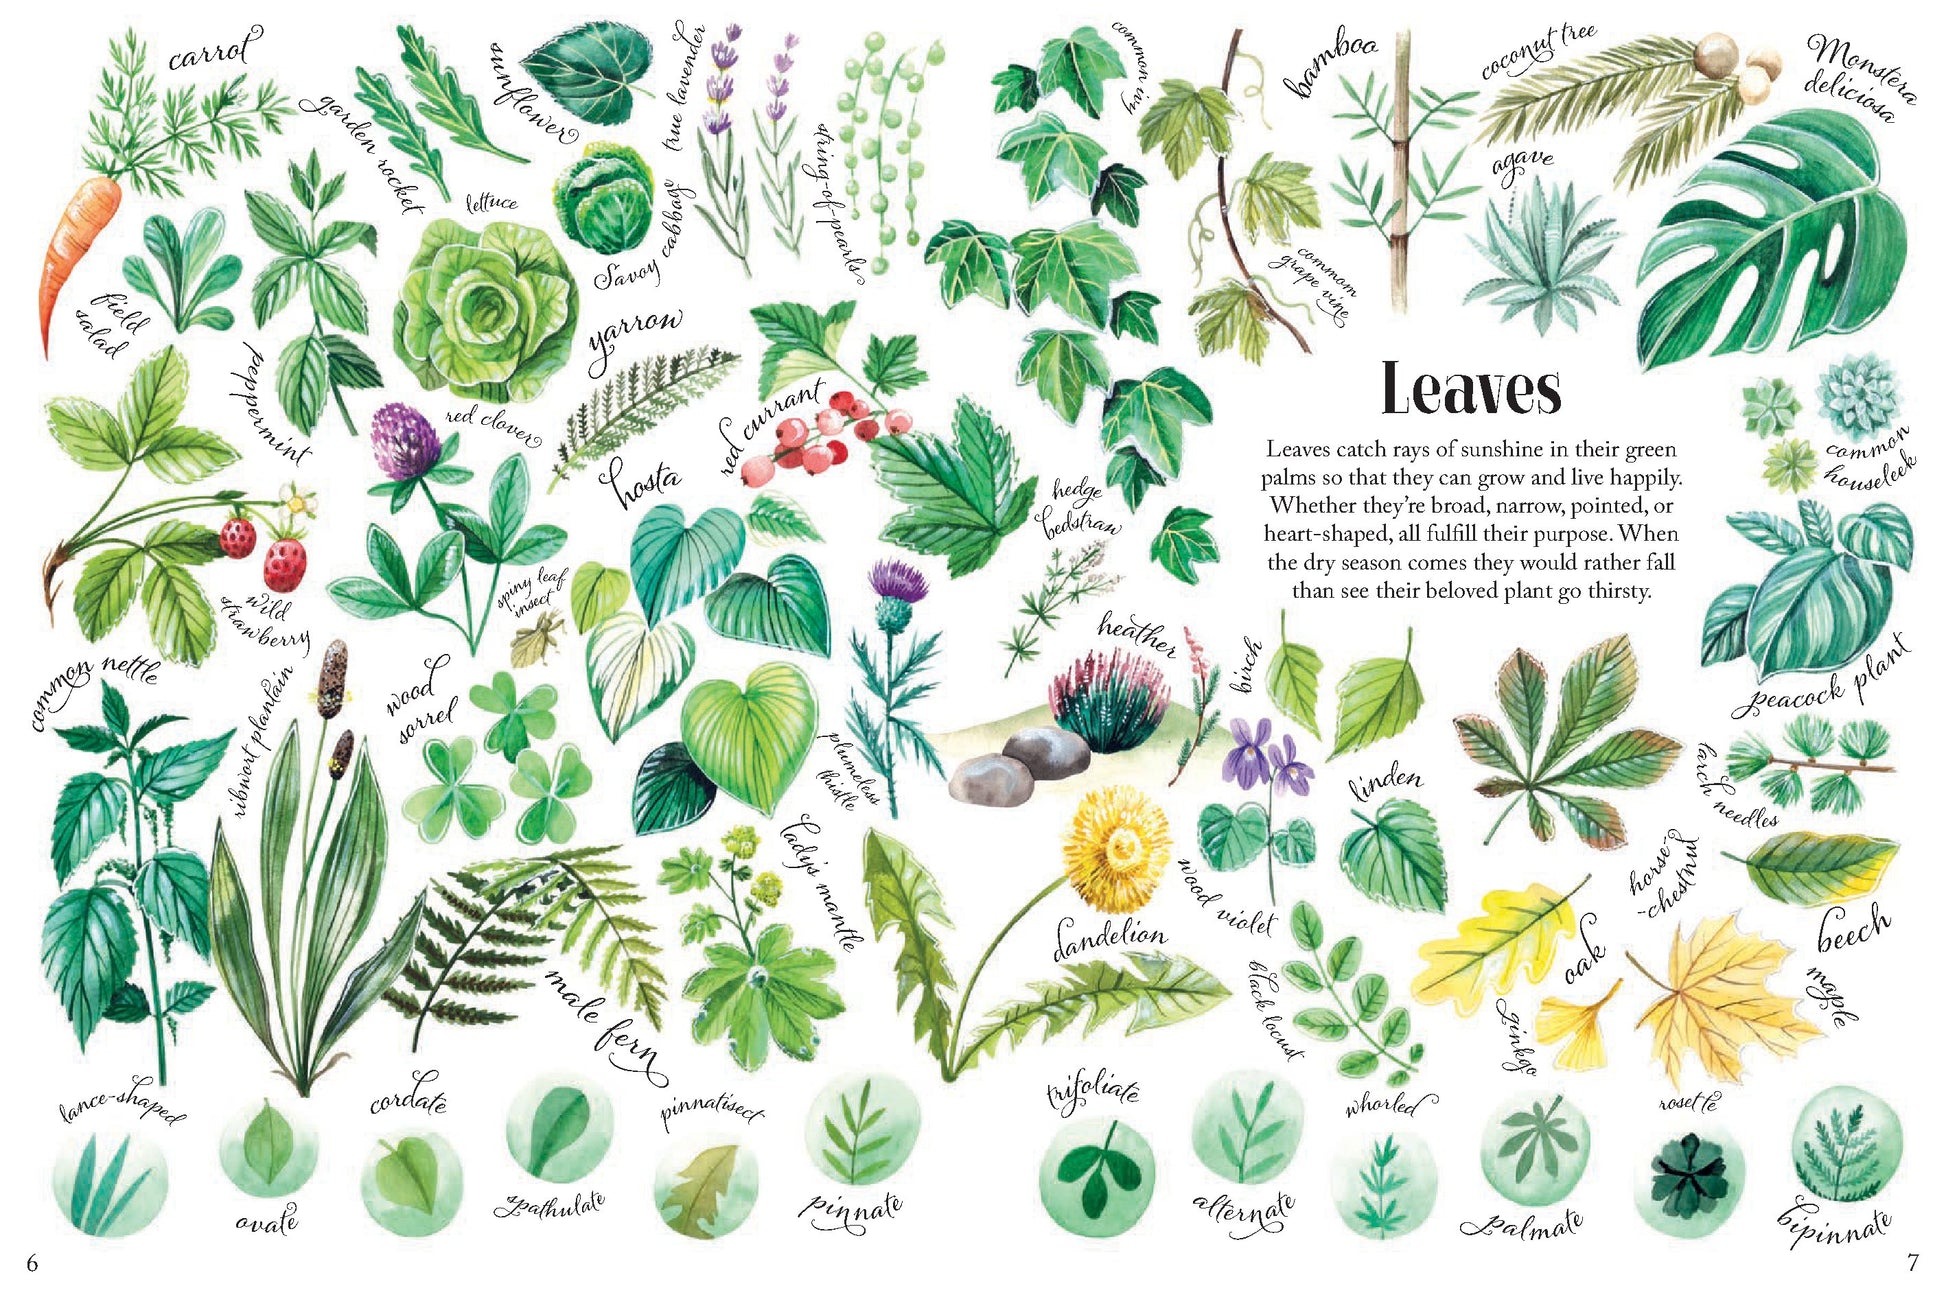 Shapes and Patterns in Nature | Hardcover